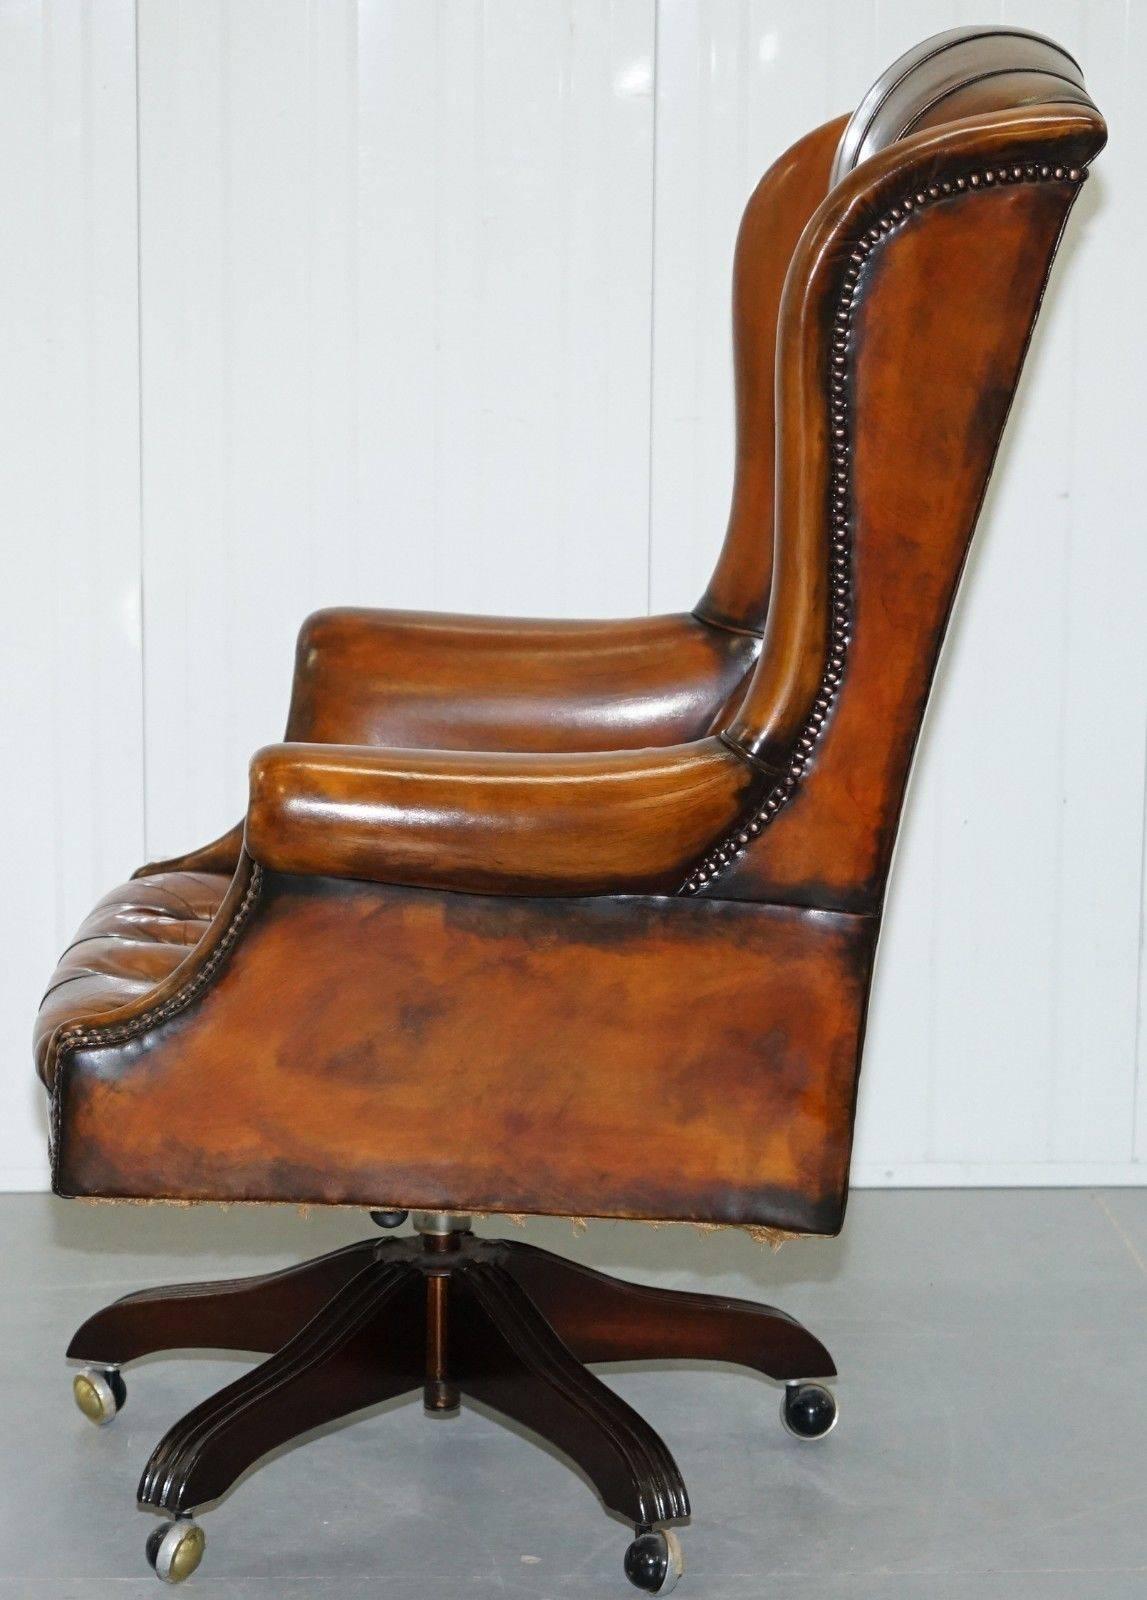 1 of 2 of Matching Chesterfield Wingback Office Chairs Hand-Dyed Brown Leather 1